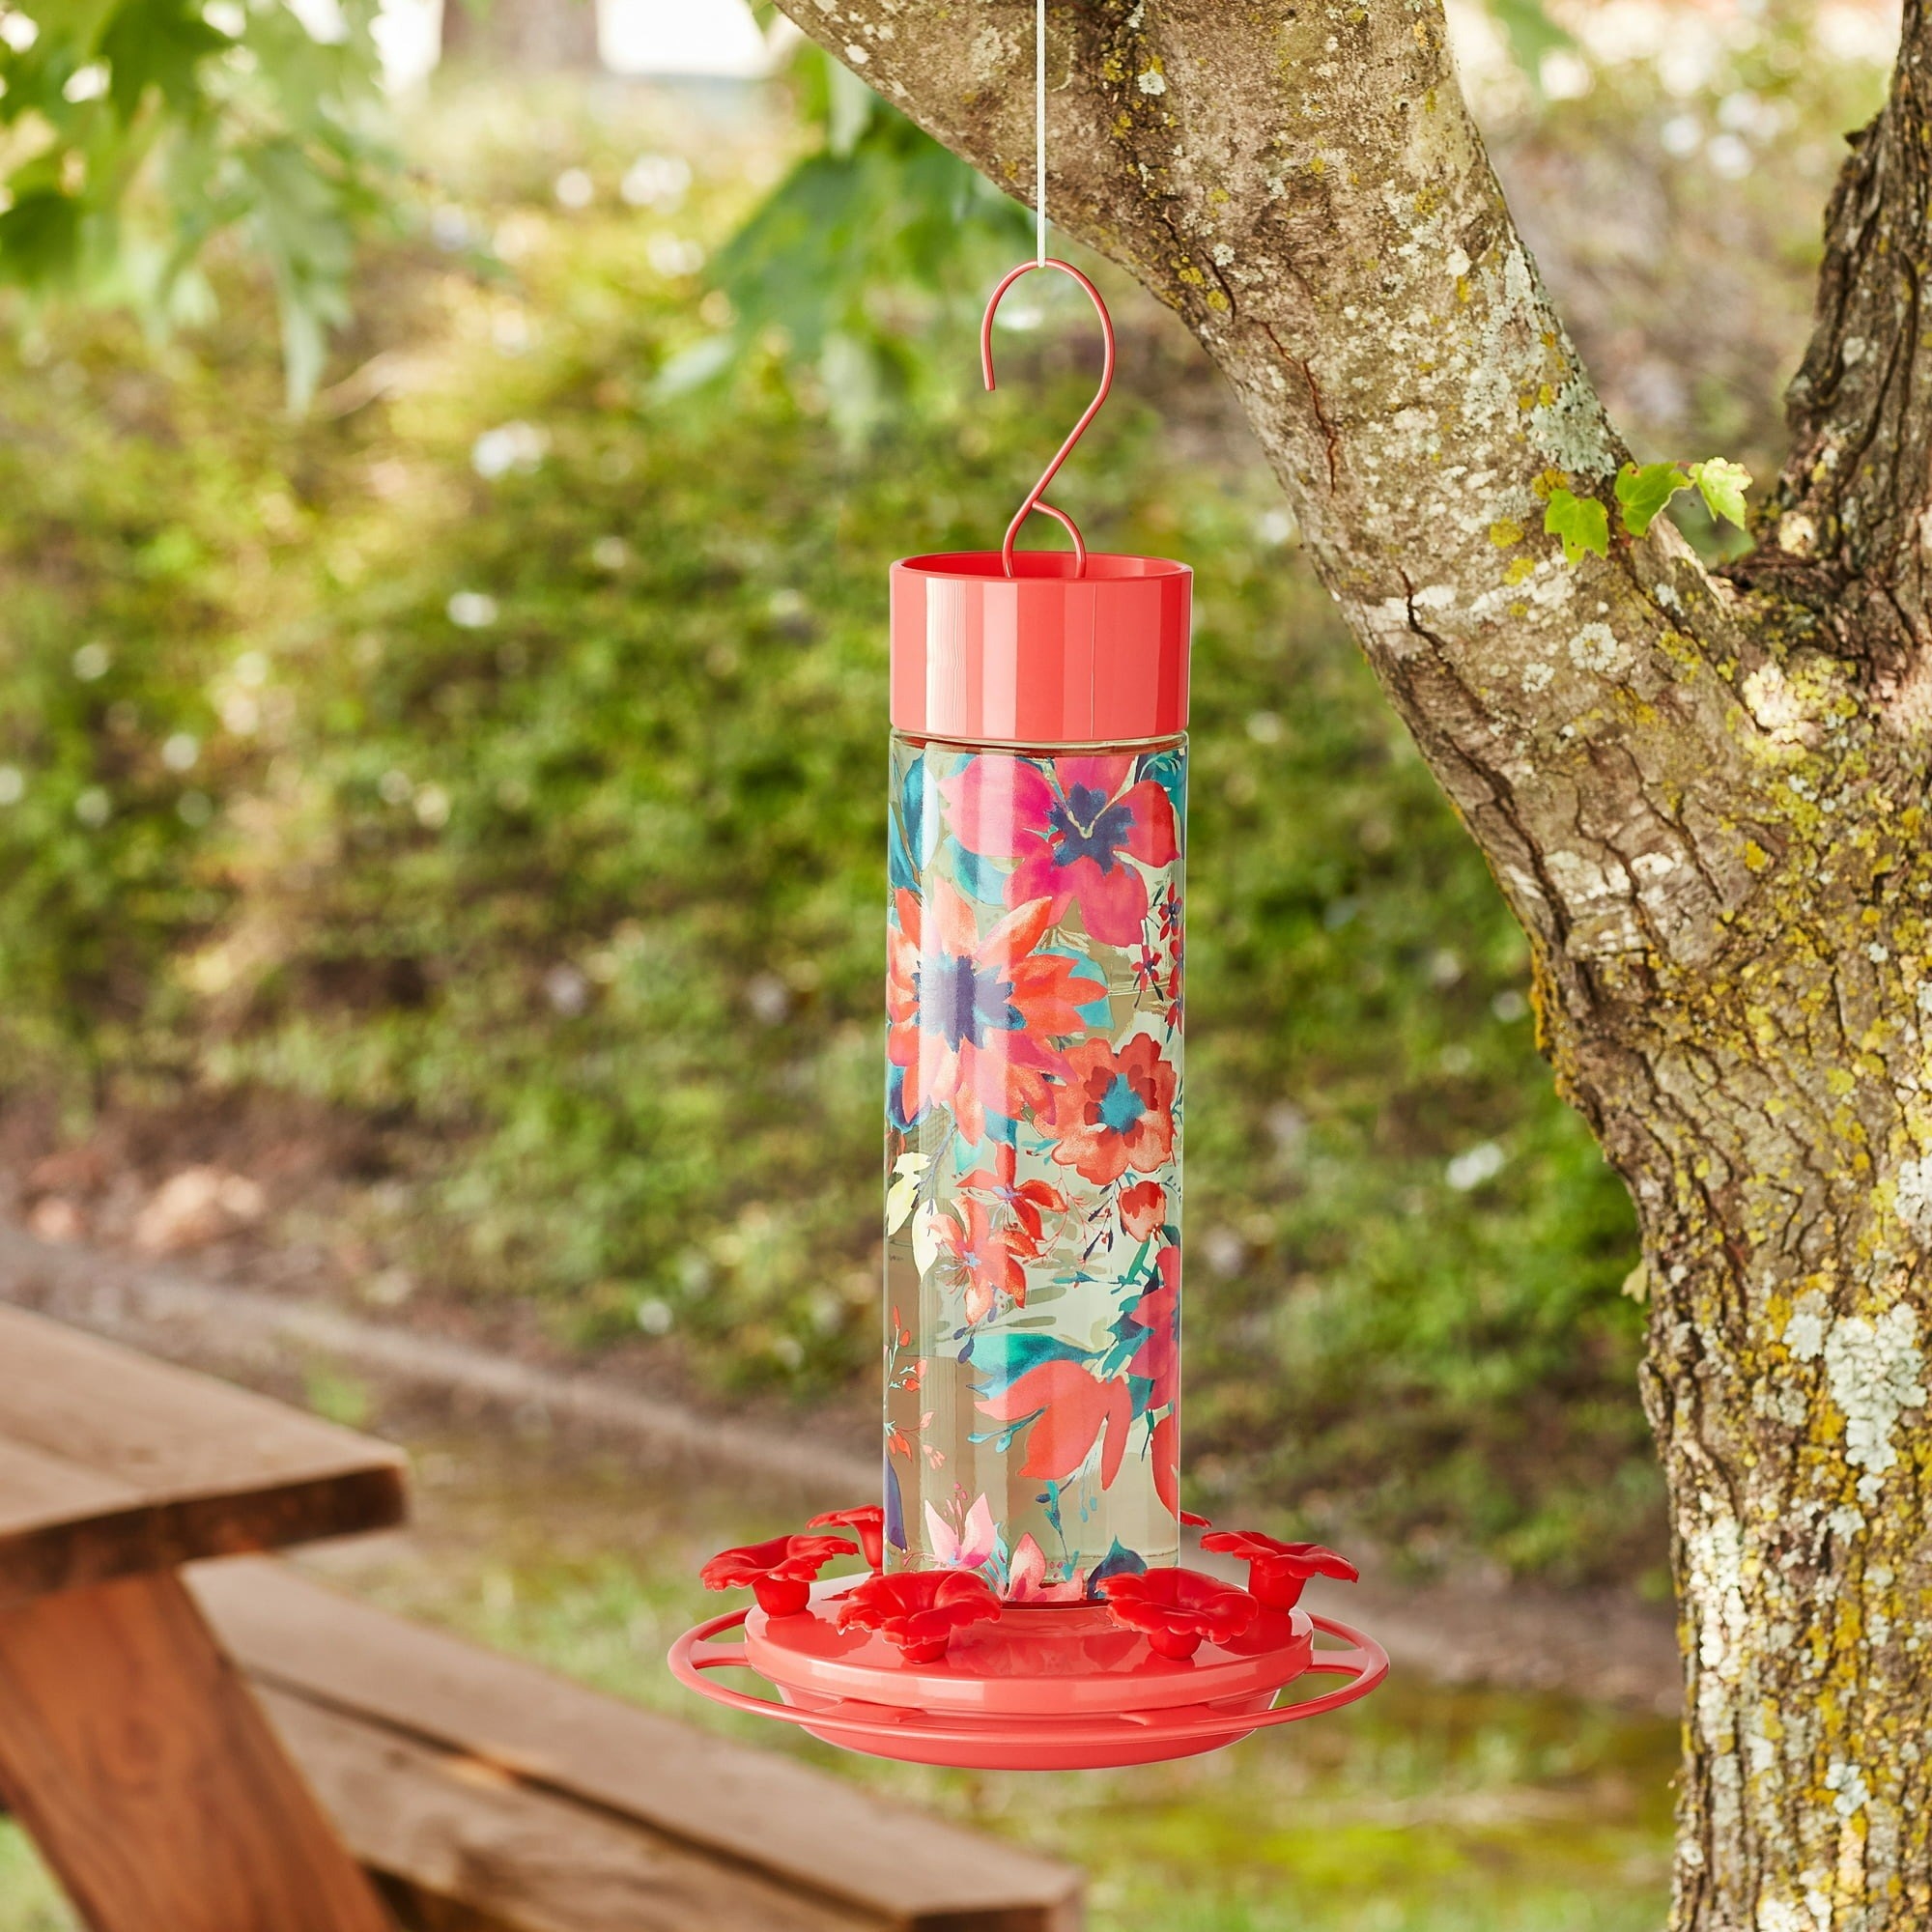 the bird feeder hanging from a tree